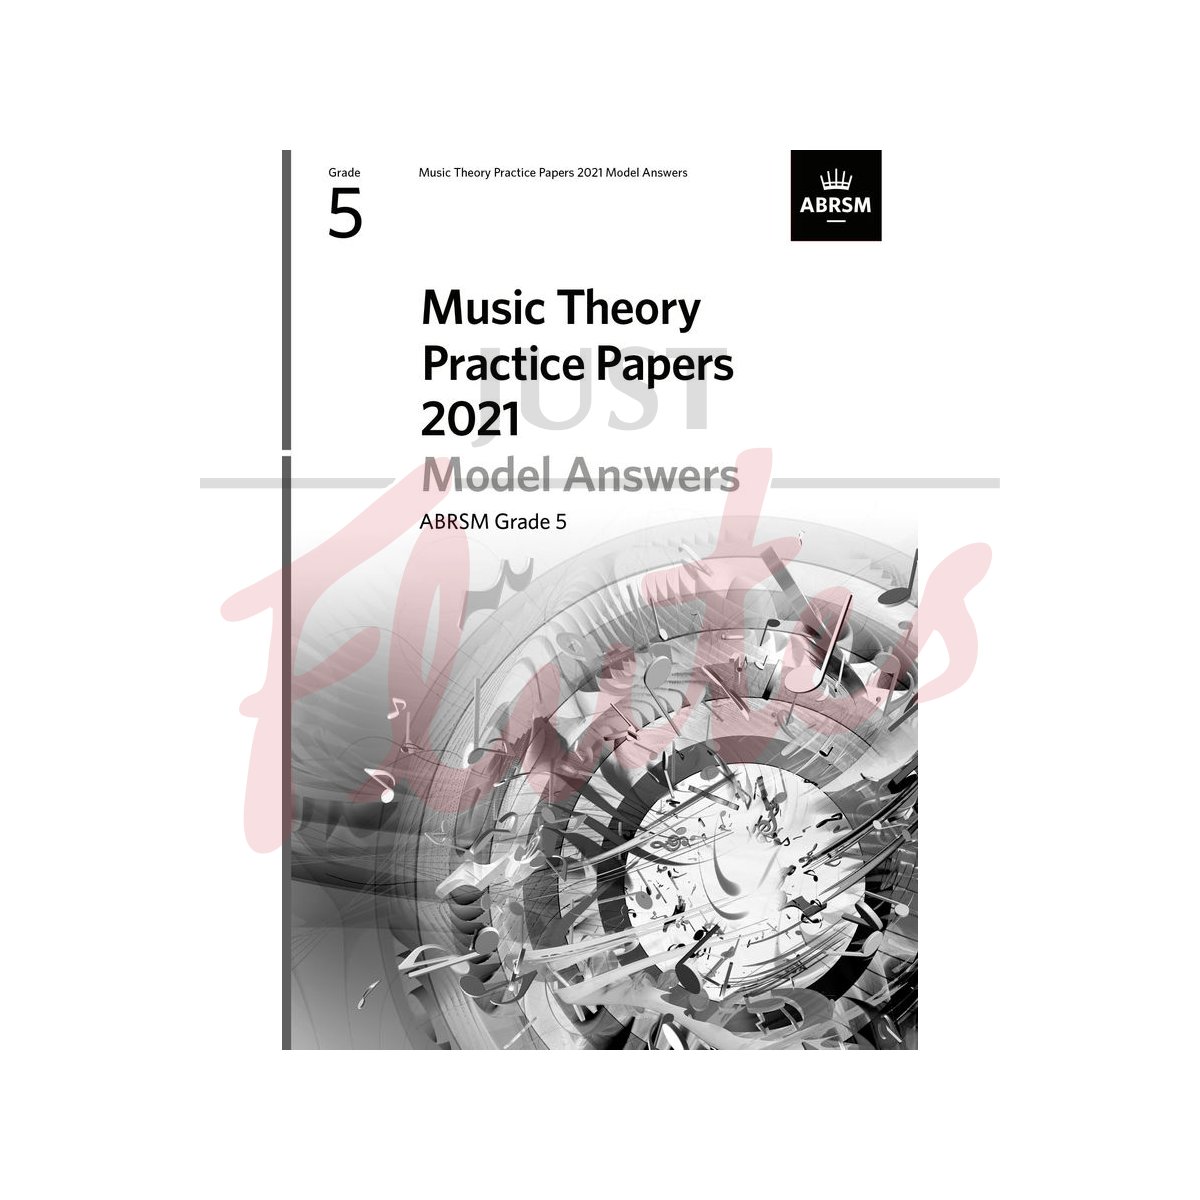 Music Theory Practice Papers 2021 Grade 5 - Model Answers